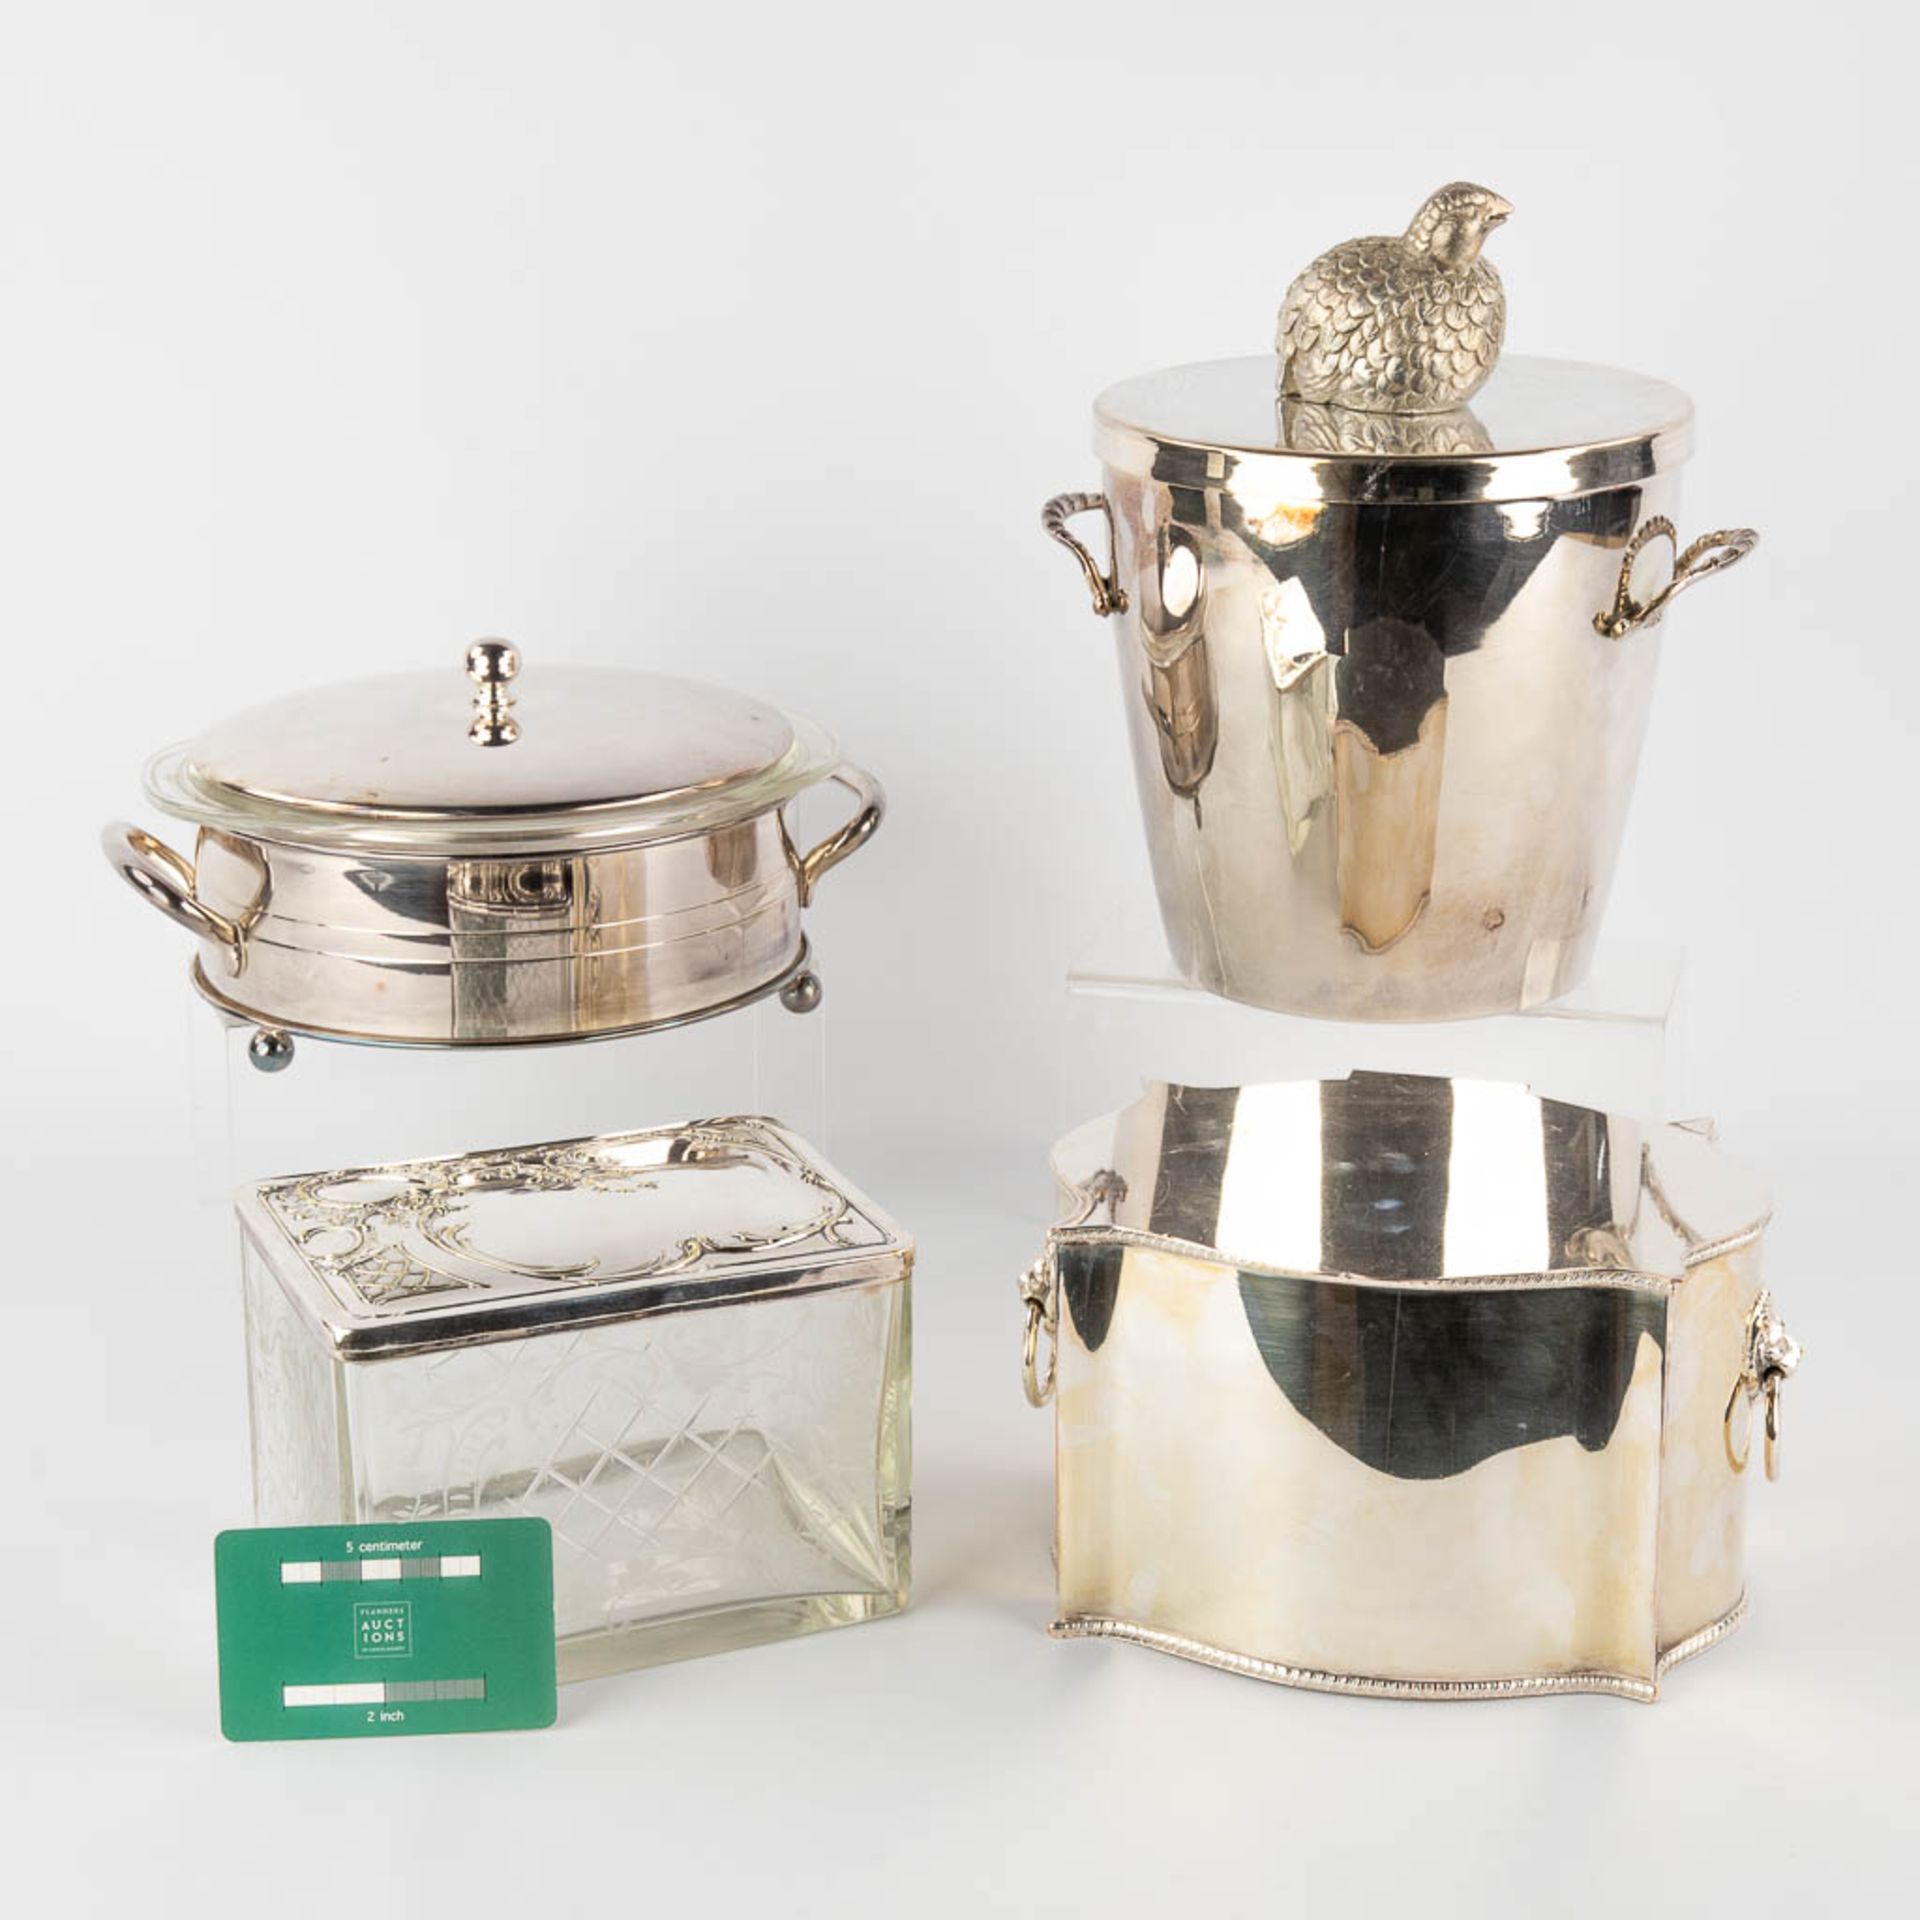 Four silver-plated storage boxes, ice-pails. (H:27 x D:20 cm) - Image 2 of 20